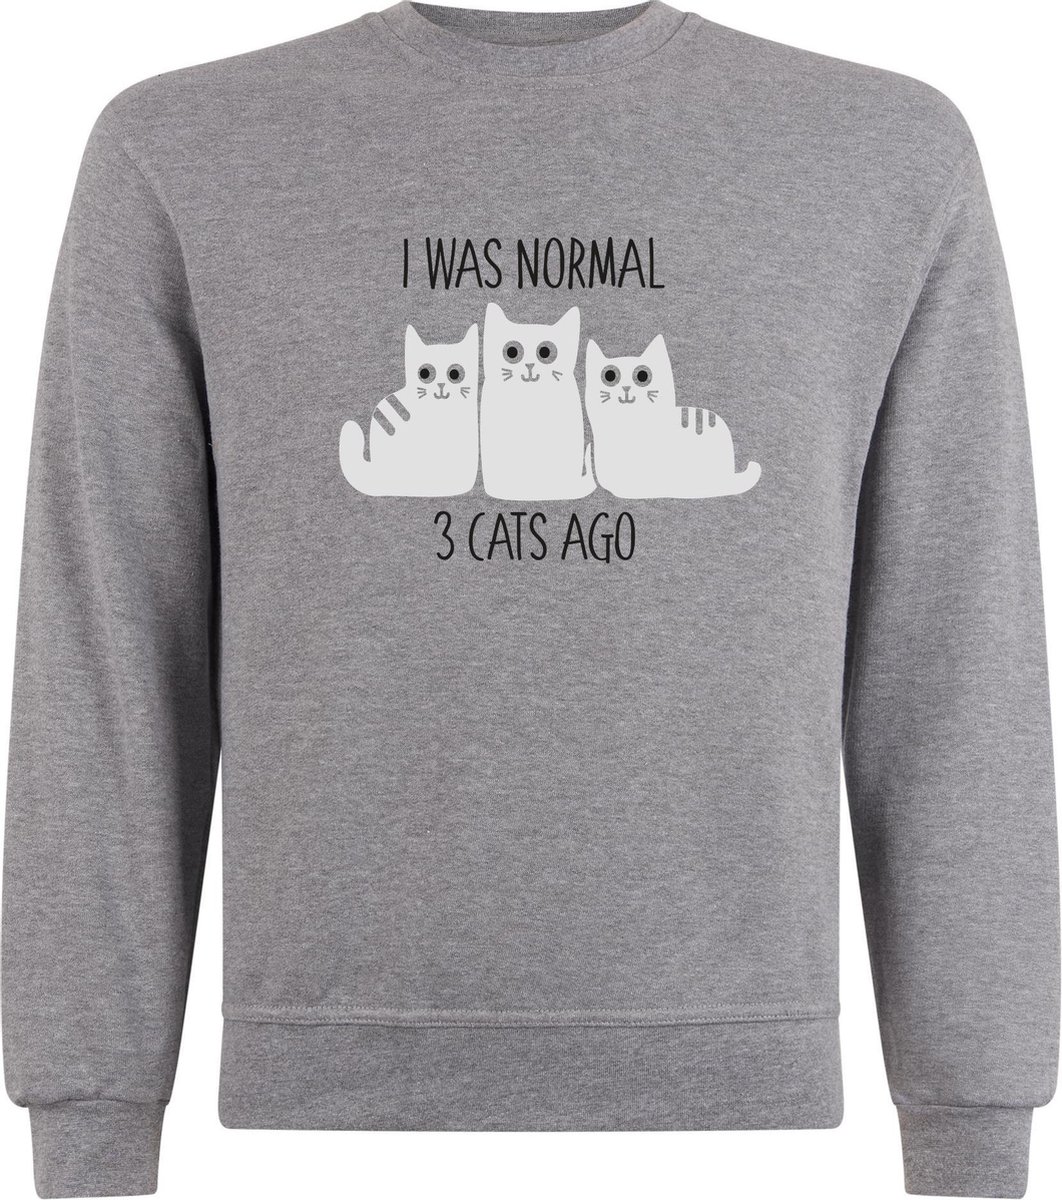 Sweater zonder capuchon - Jumper - Trui - Vest - Lifestyle sweater - Chill Sweater - Kat - Cat - I was normal 3 cats ago - S.Grey - XL